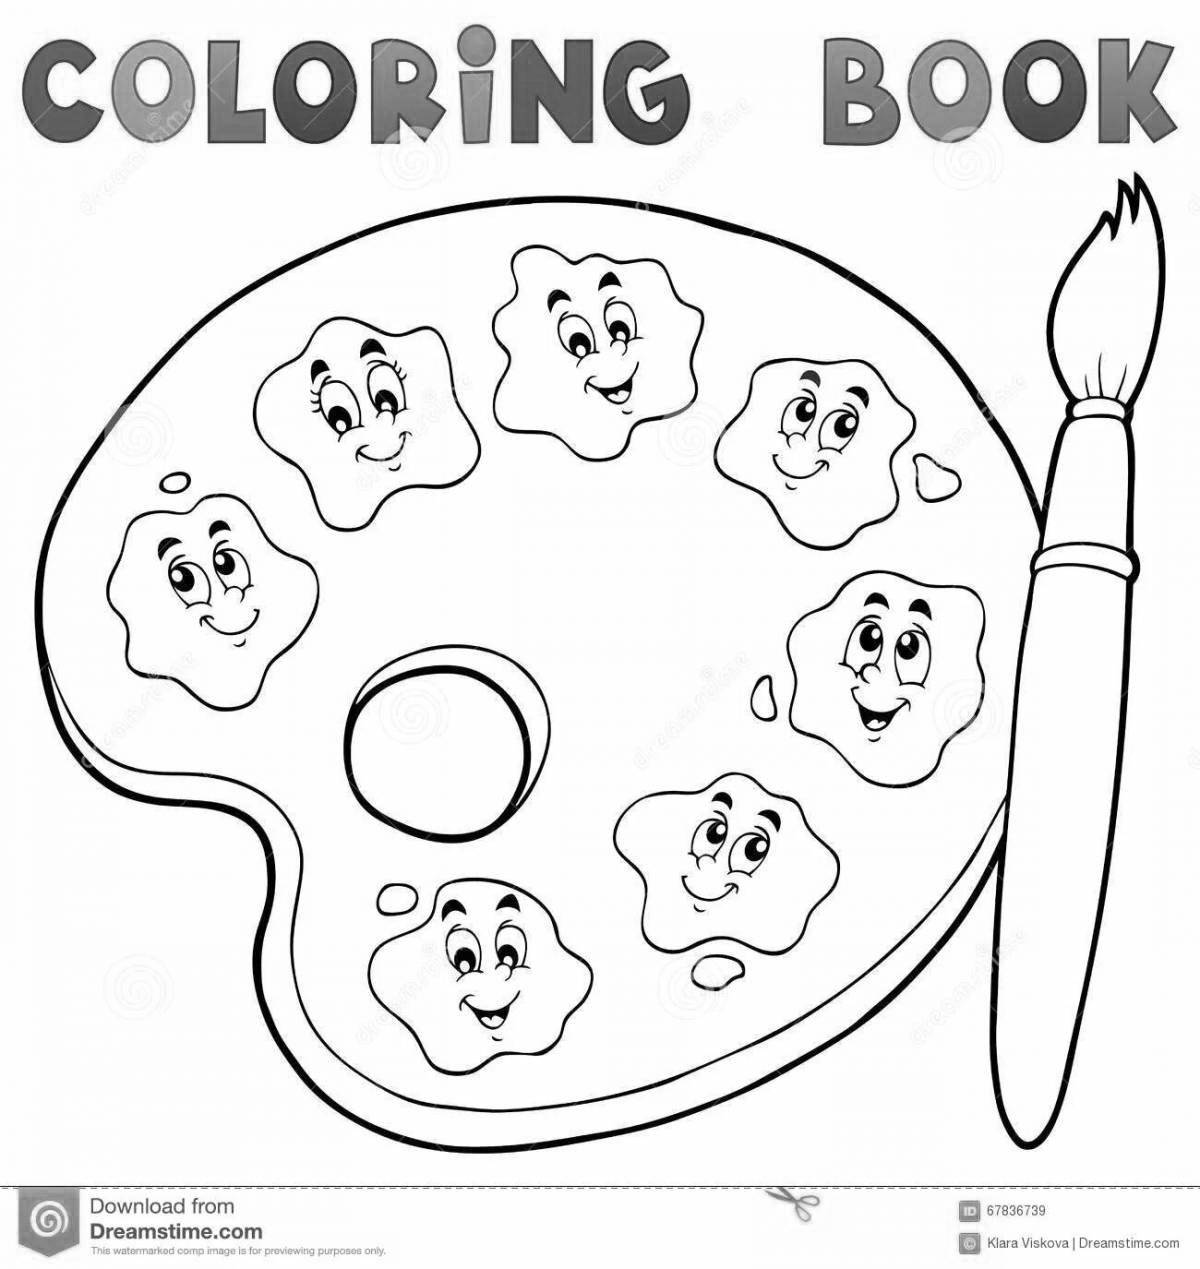 Luminous figurine coloring page